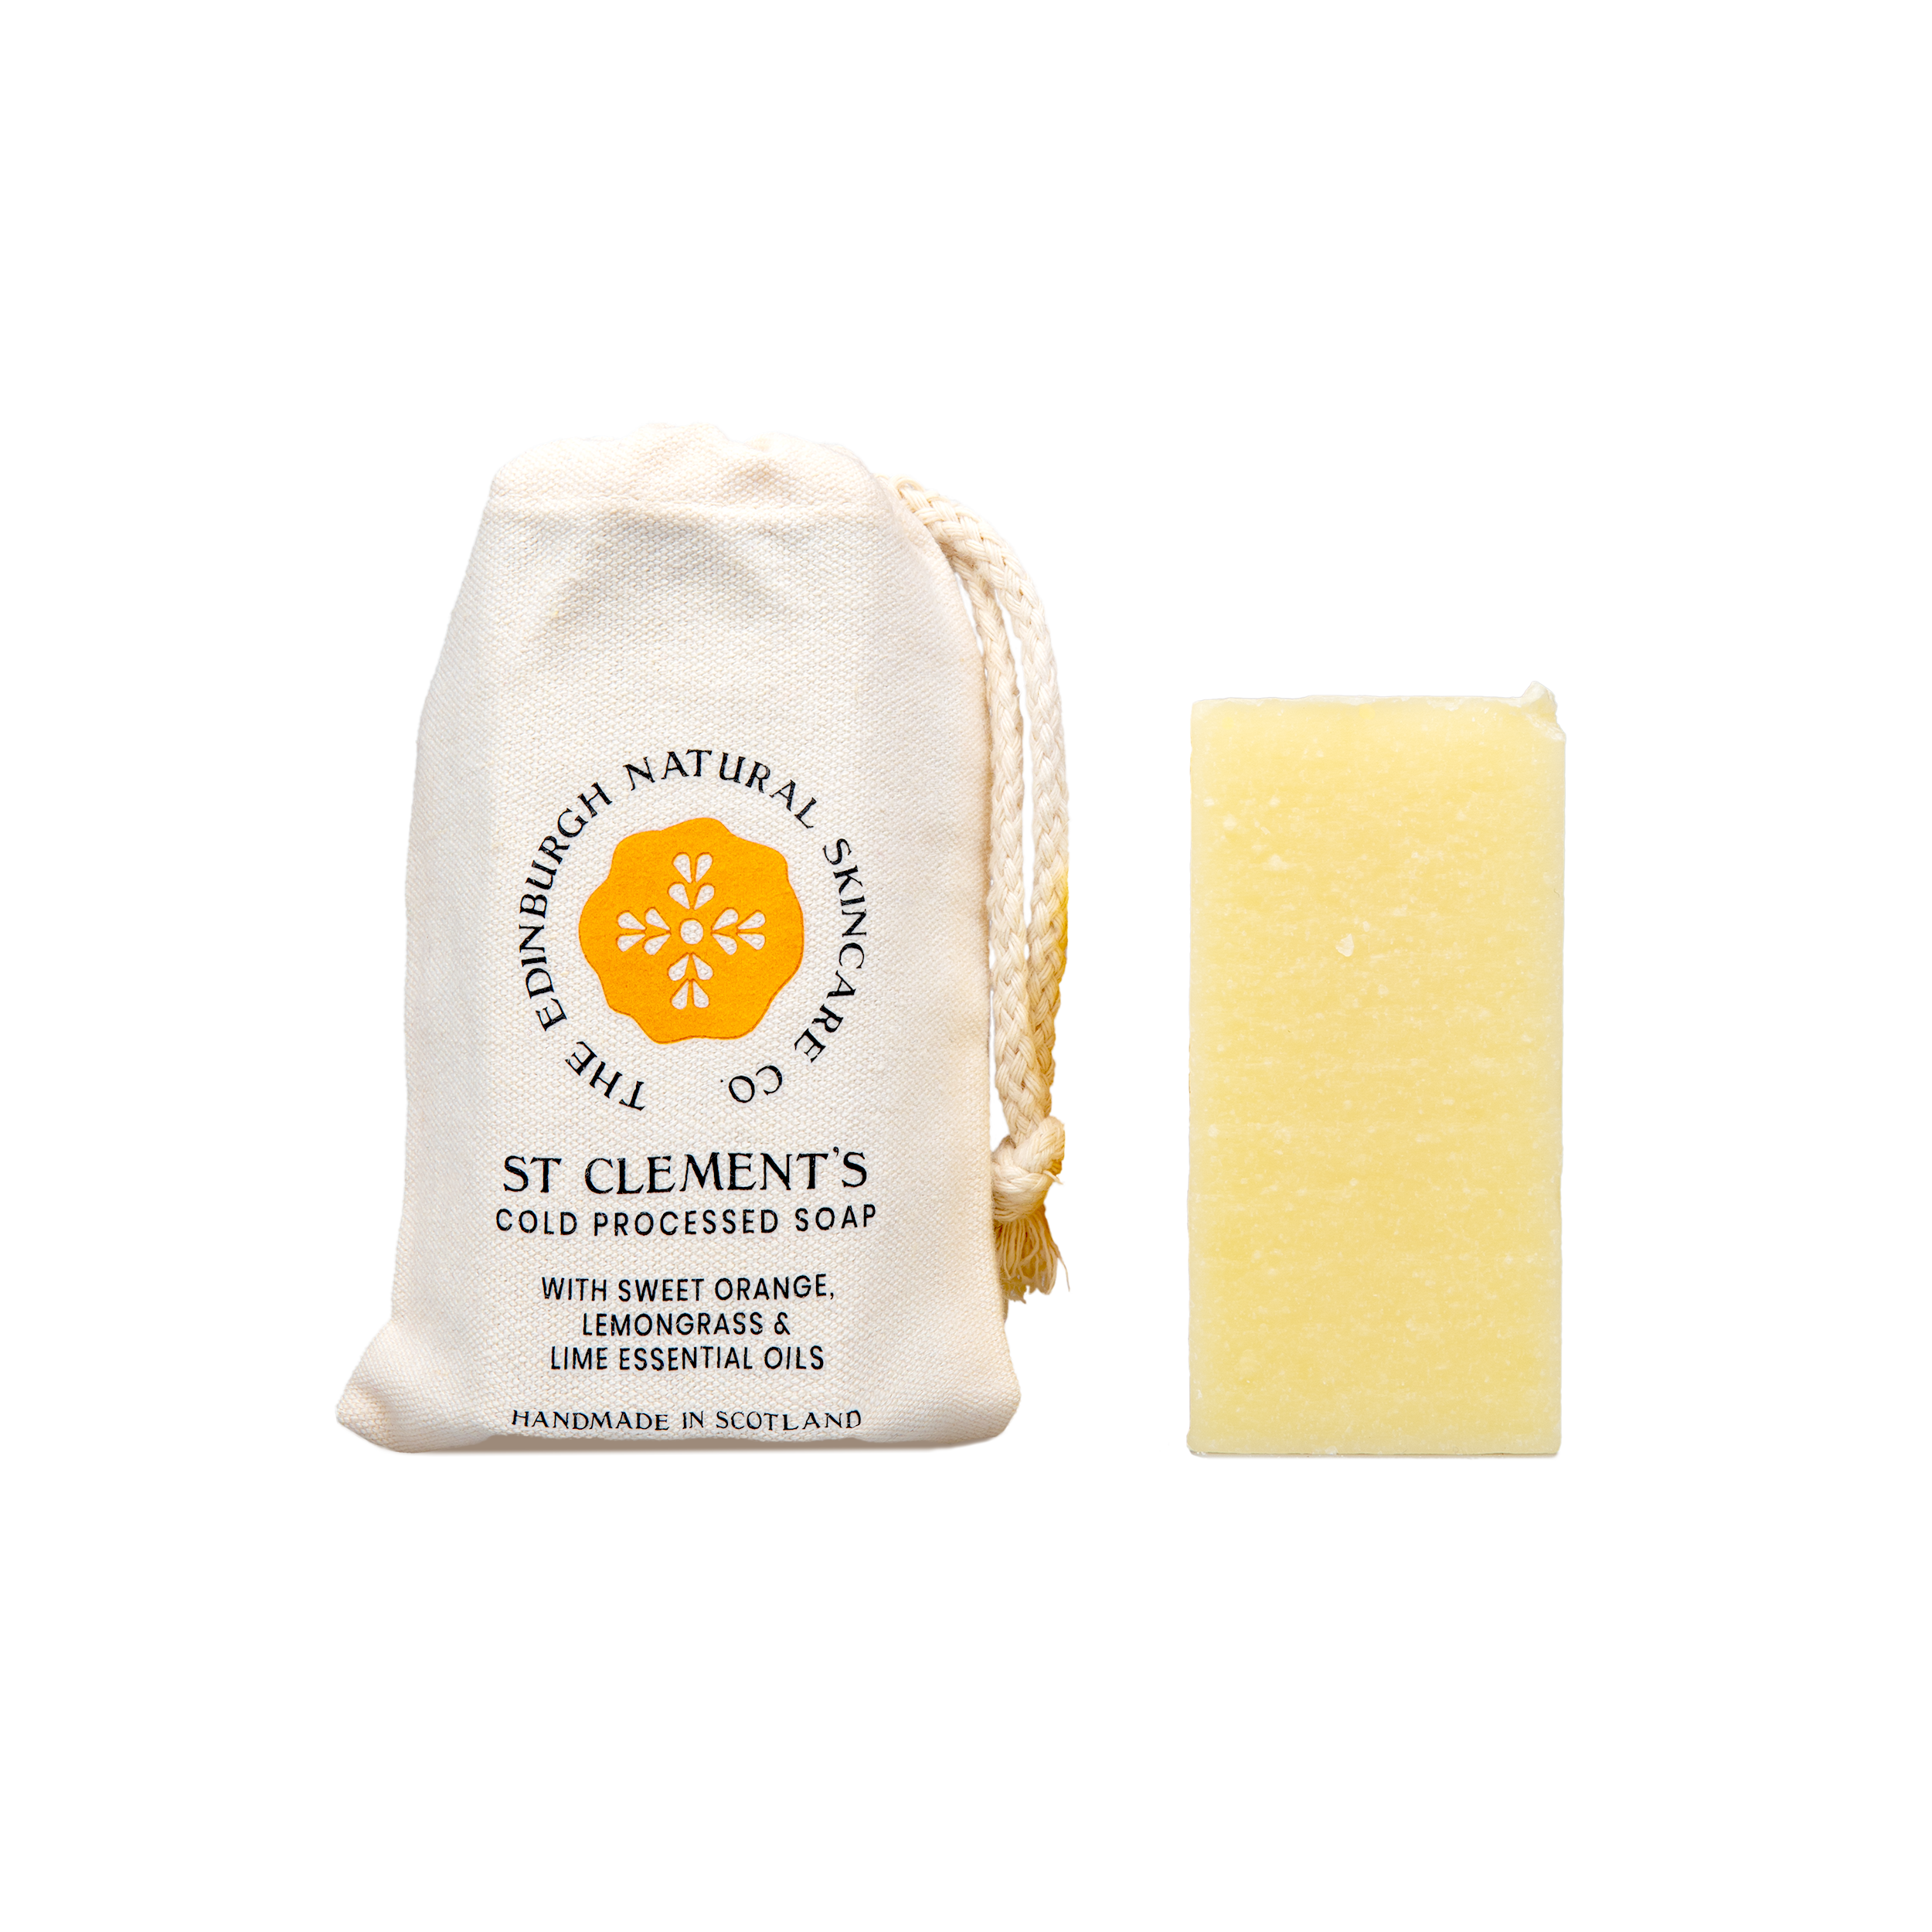 ST CLEMENT'S CLEANSING SOAP FOR THE FACE AND BODY